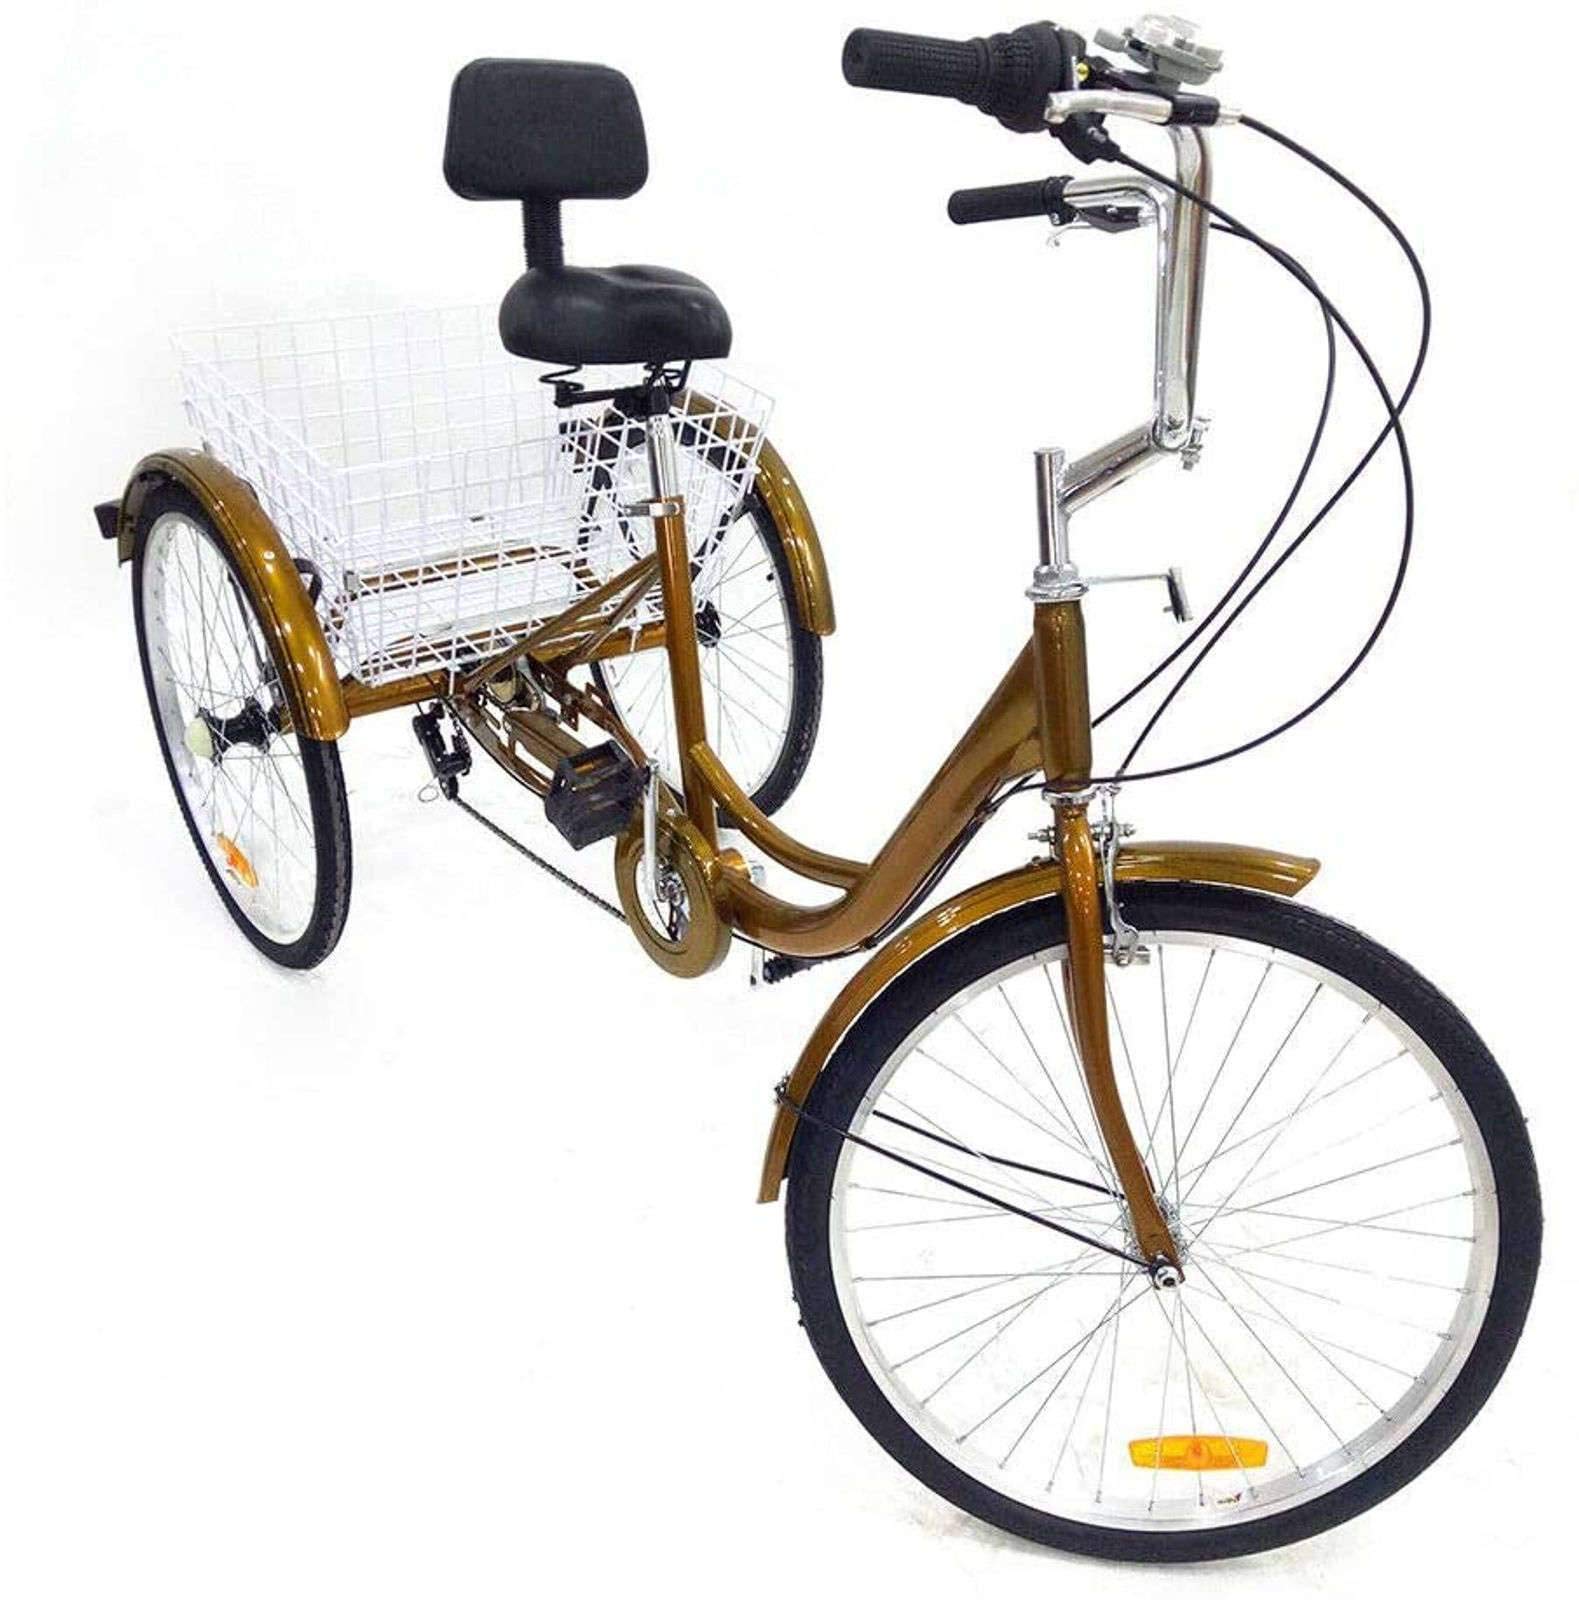 In-Depth Review: HKPLDE 24 Adult Tricycle with White Basket